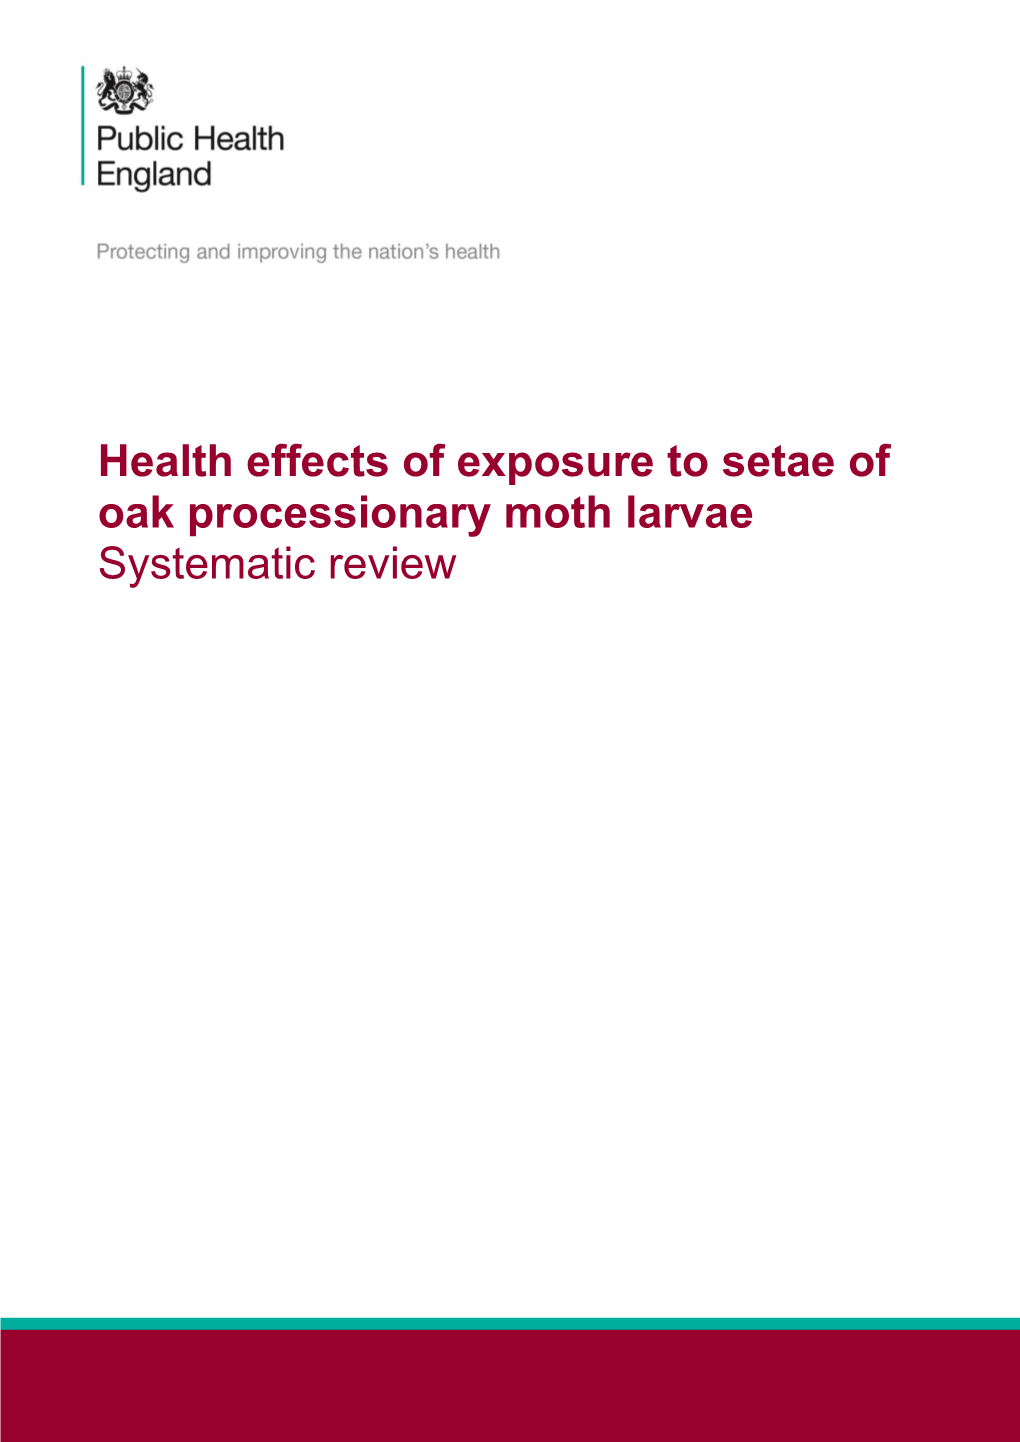 Health Effects of Exposure to Setae of Oak Processionary Moth Larvae Systematic Review